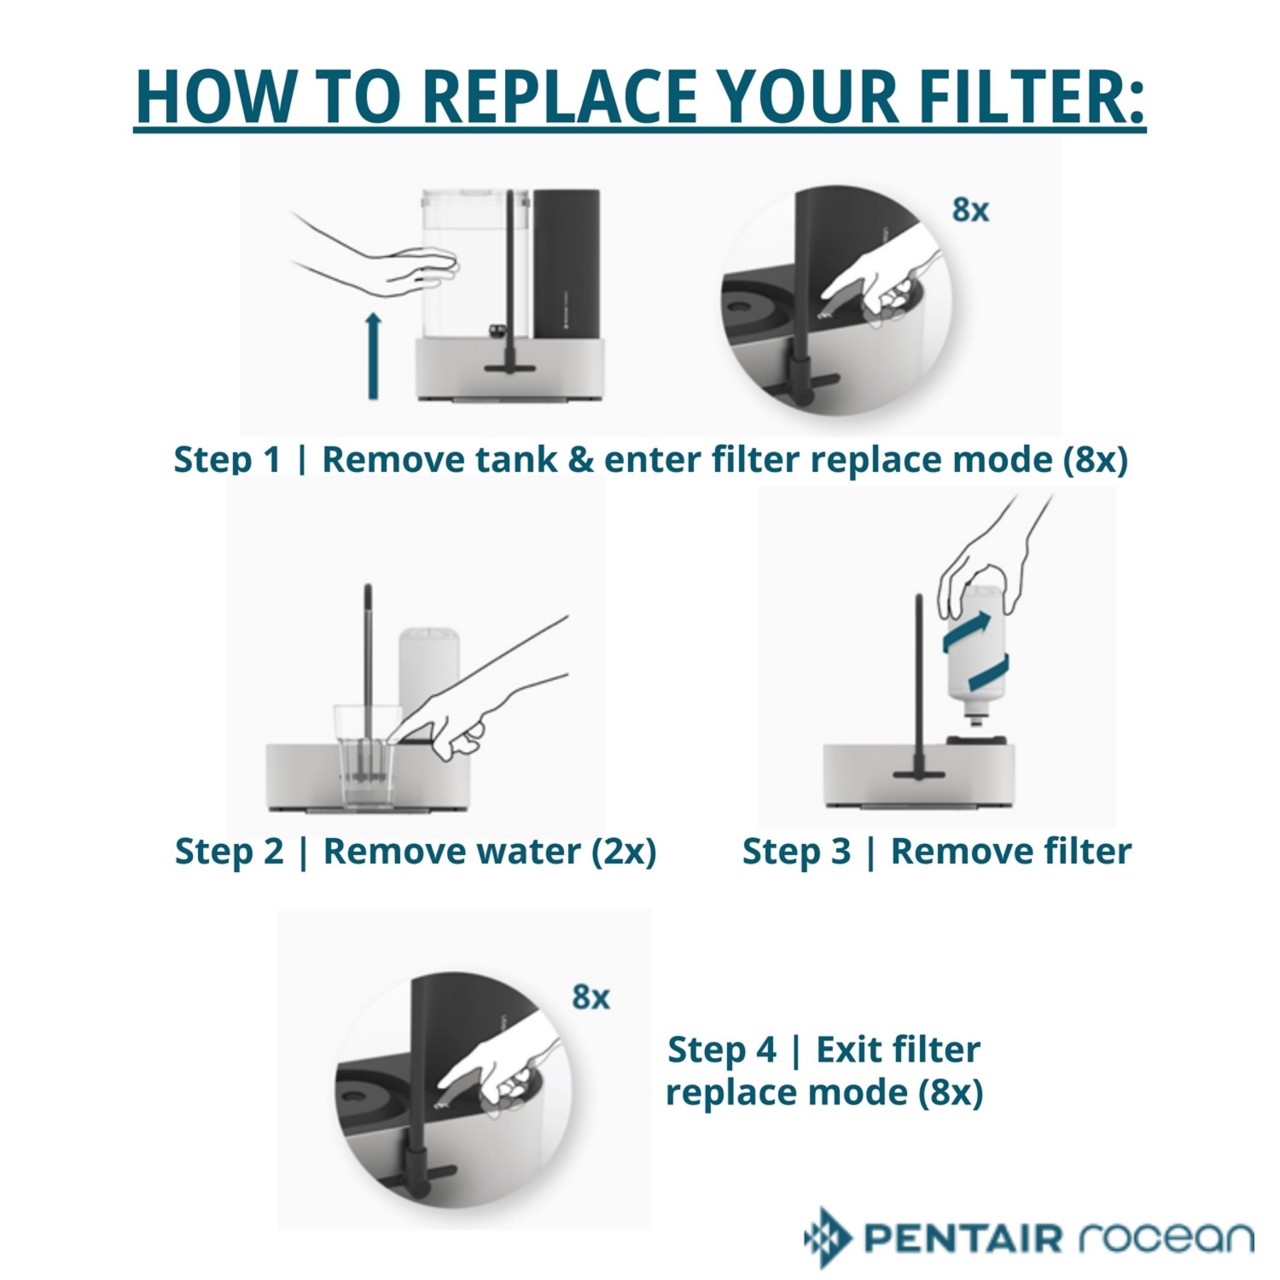 How to replace your filter visuals